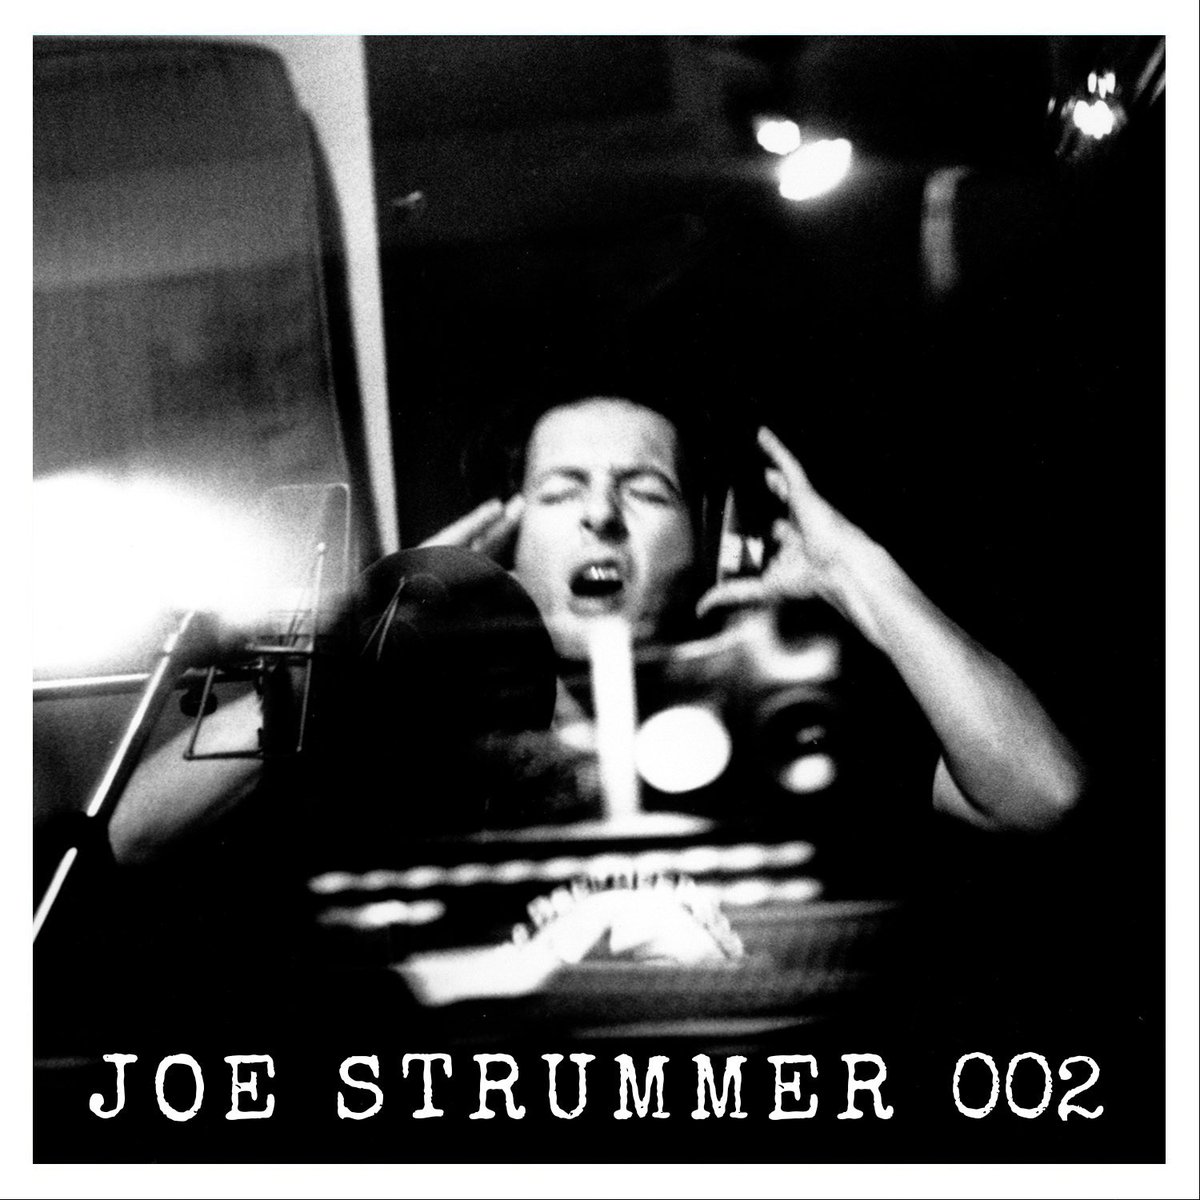 Retweet for a chance to win. To celebrate our @LlSTENlNG_PARTY on Thursday, we have two @JoeStrummer 2 vinyl box sets to give away An ace collection is all three Mescaleros studio albums, plus 15 rare & unreleased tracks & more Two winners picked at midnight on Thursday